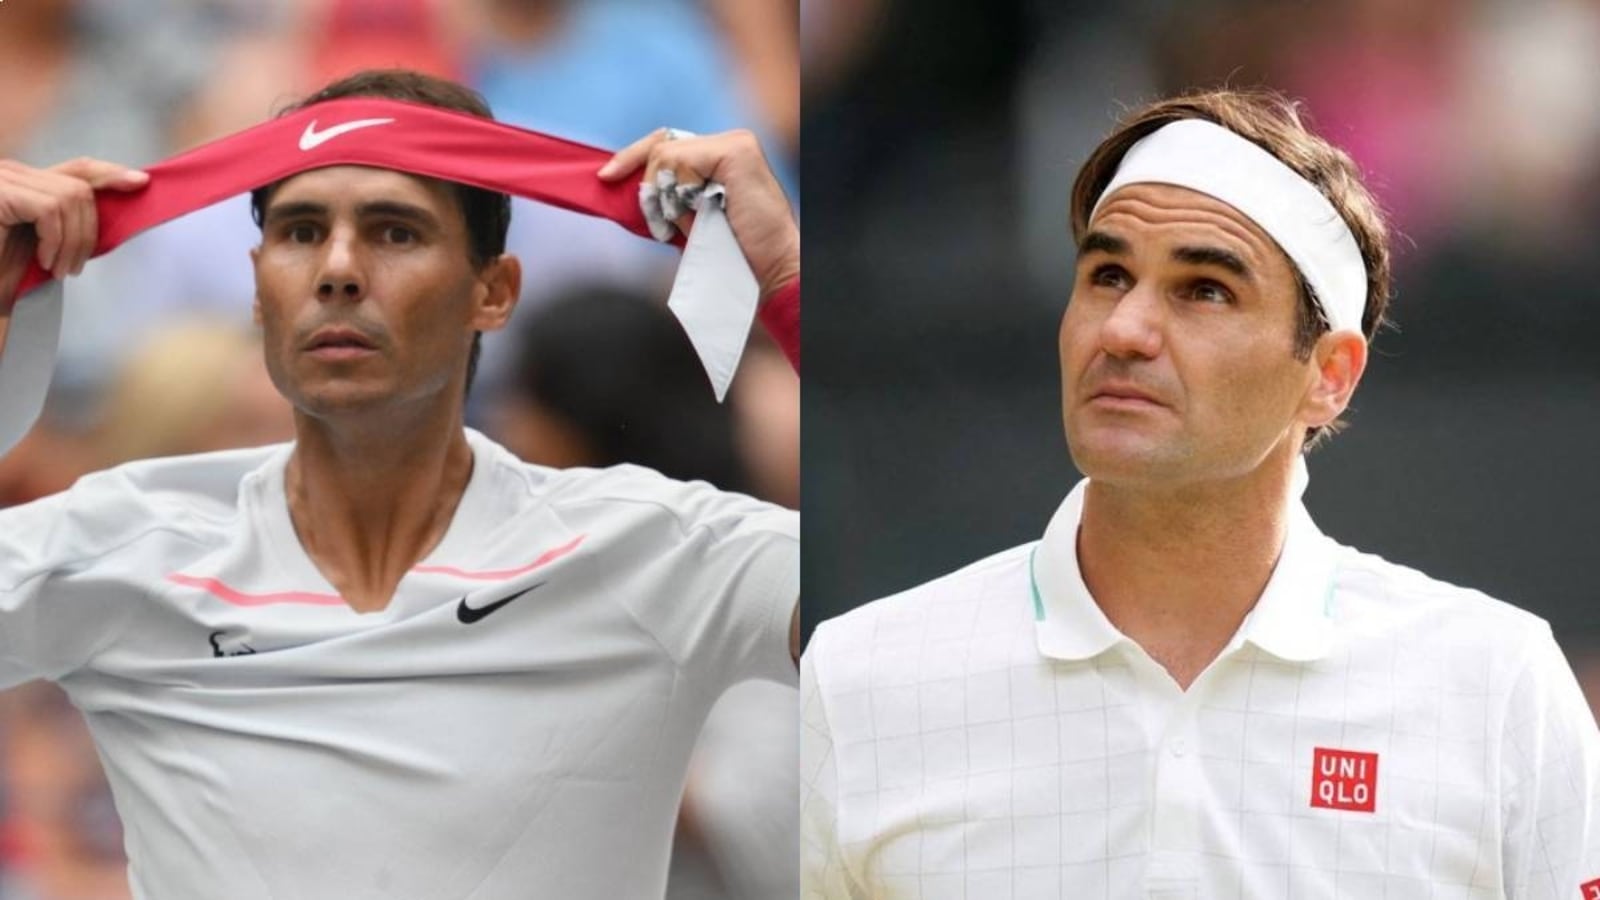 ‘Without Federer, Nadal would’ve been known only as clay-court player. He’ll feel empty’: Tennis great’s massive claim